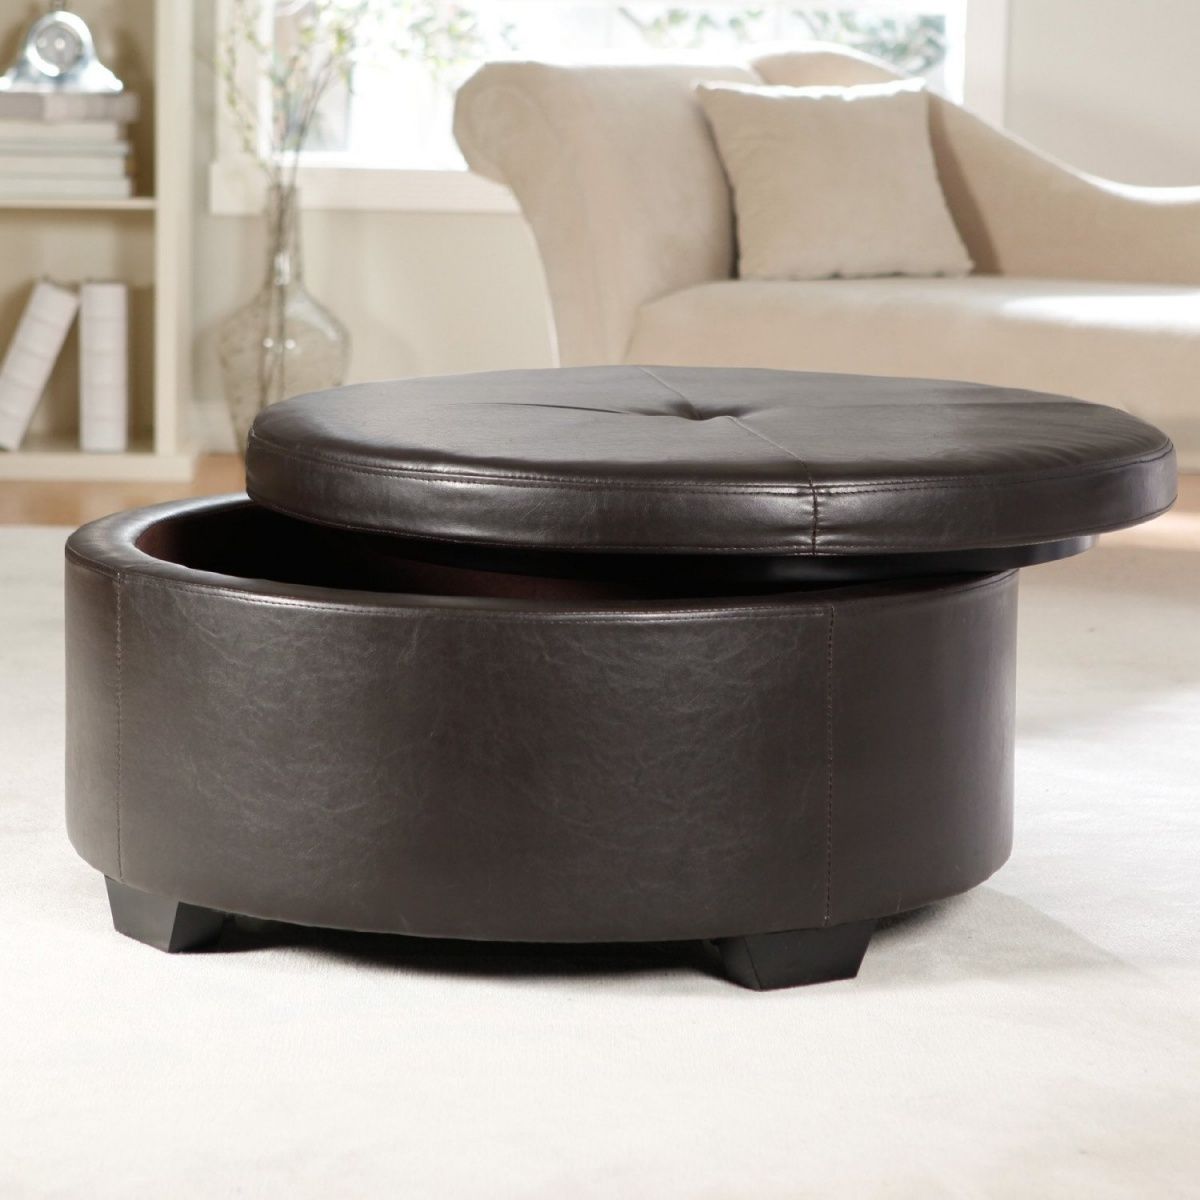 Round Coffee Table Ottomans Coffee Table With Ottoman Related Round Coffee Table Ottoman As Your Best Round Table (View 8 of 10)